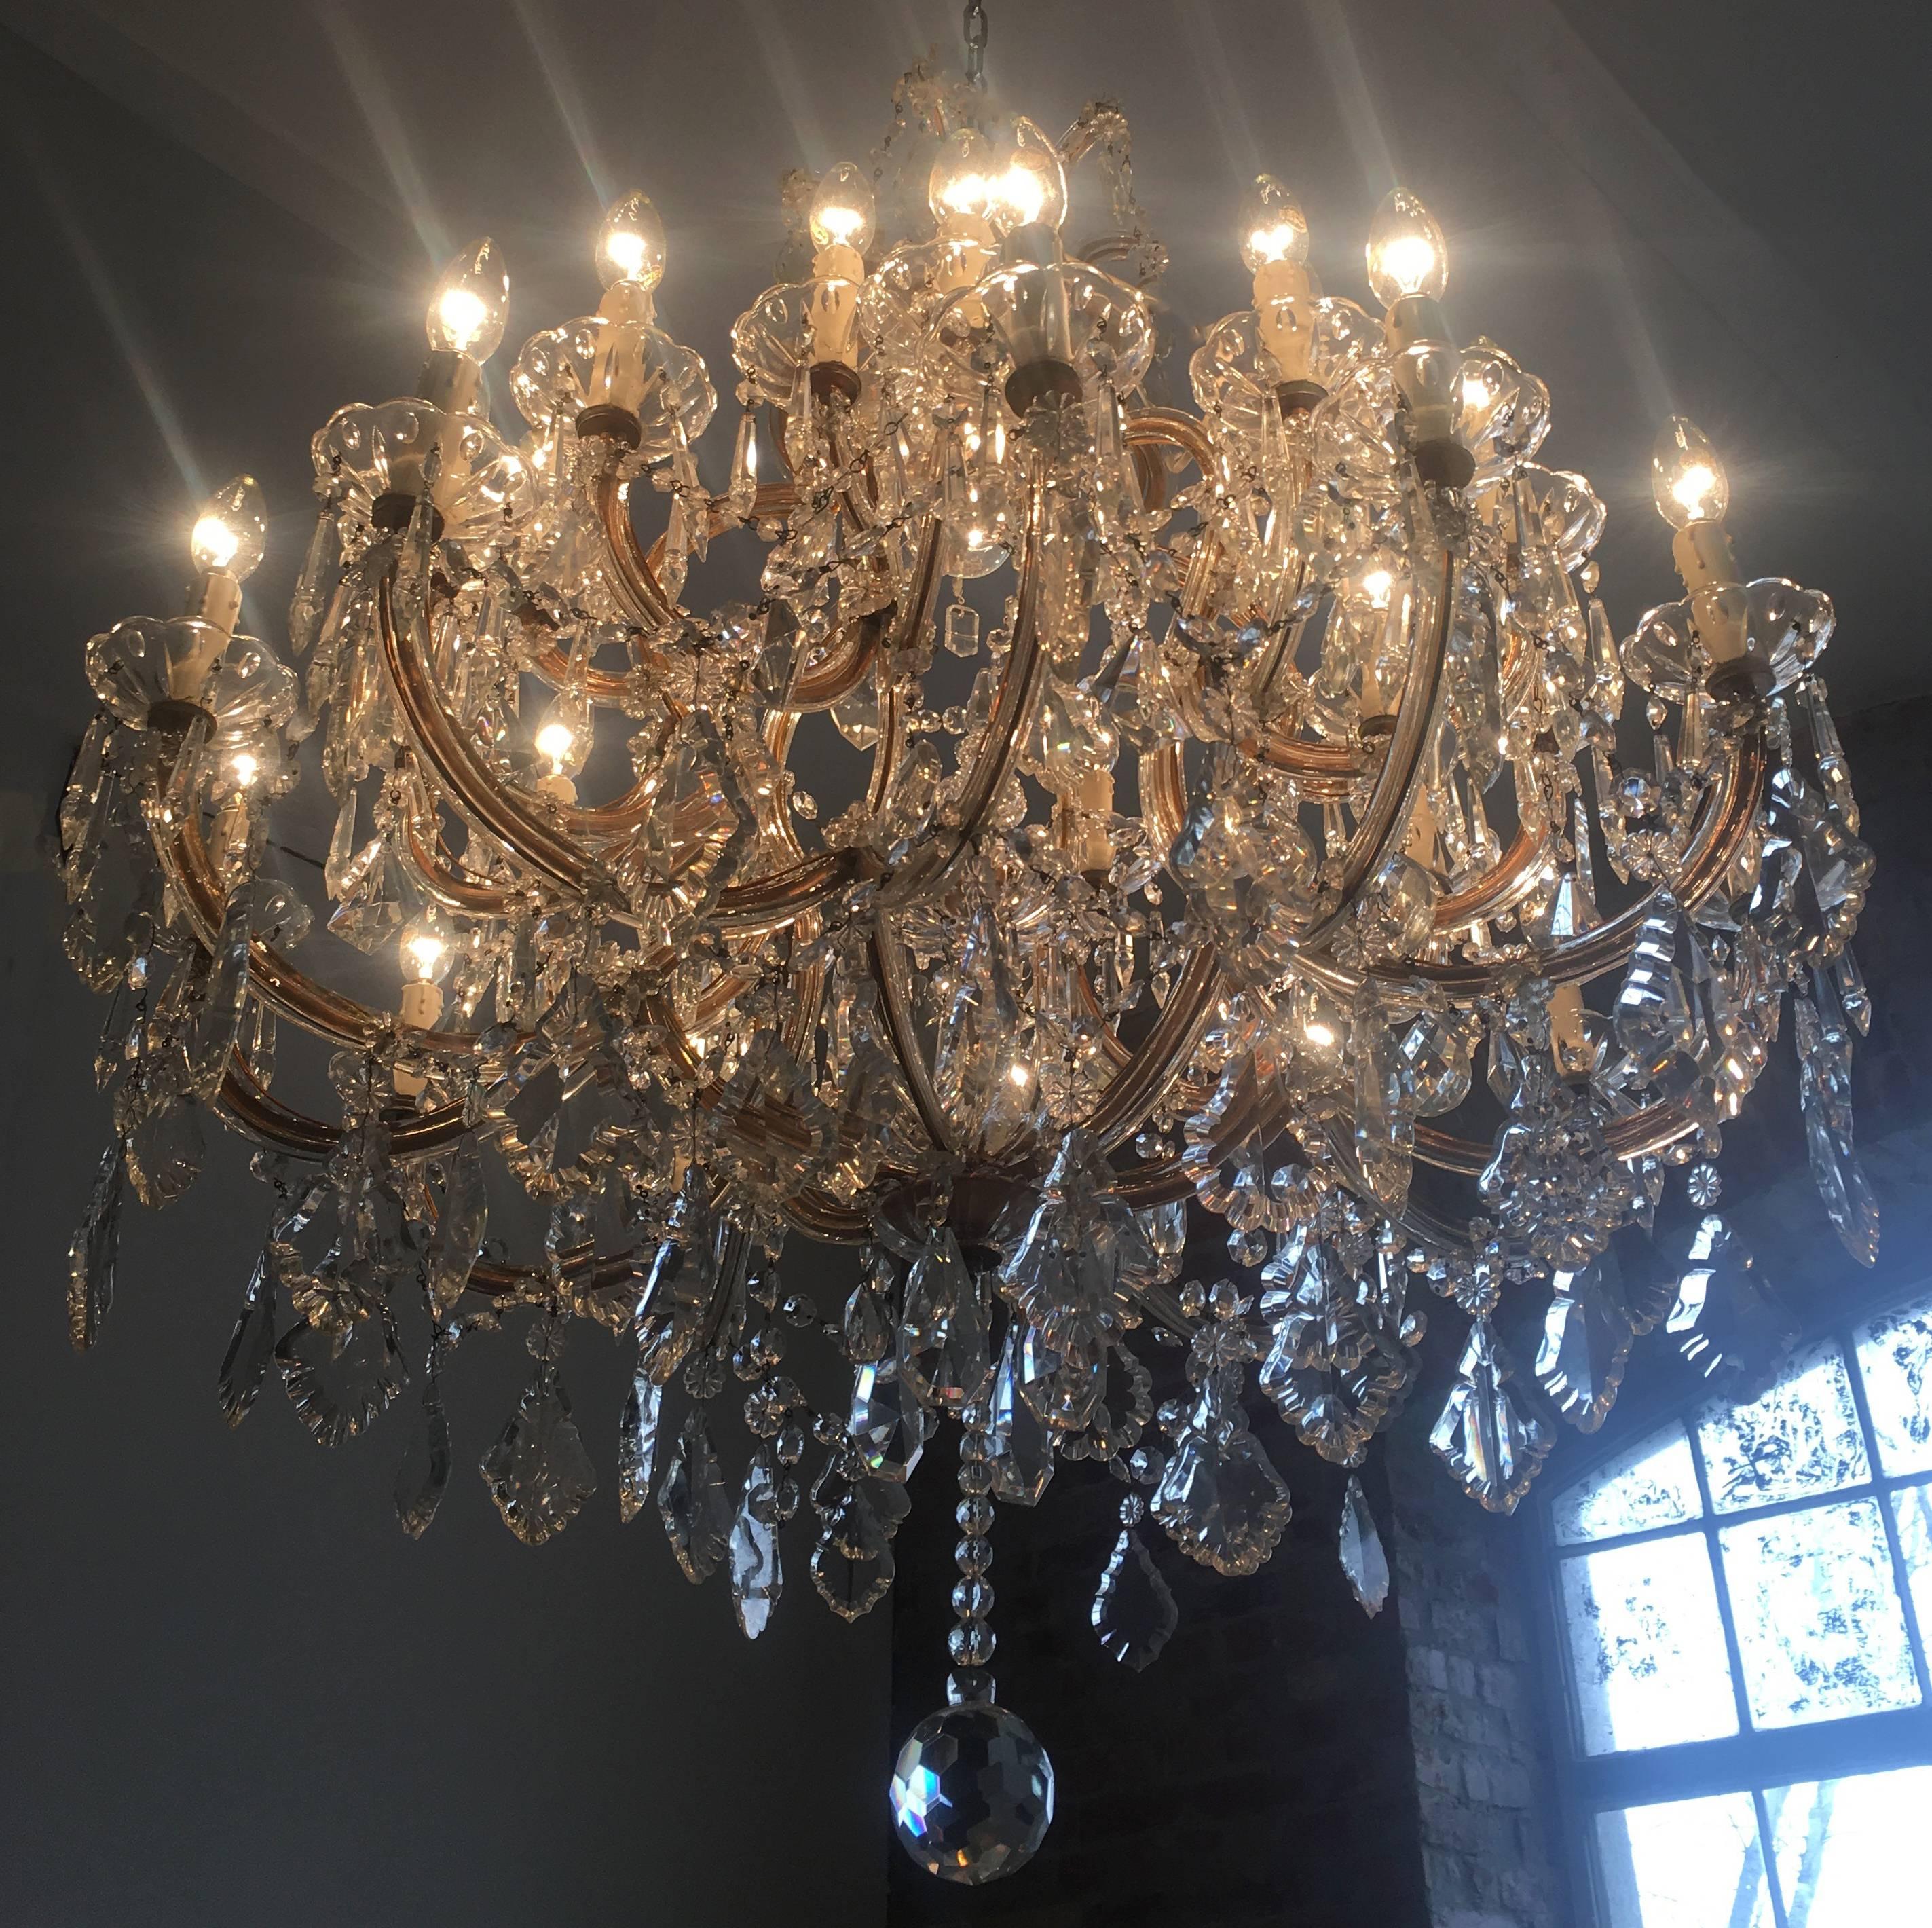 An elegant crystal chandelier 'Maria Theresa' with 30 light fittings and one central light.
This beautiful chandelier is embellished with clear Bohemian crystal pendeloques, flower rosettes and octagons.
In the centre, there is a cut coupe with an